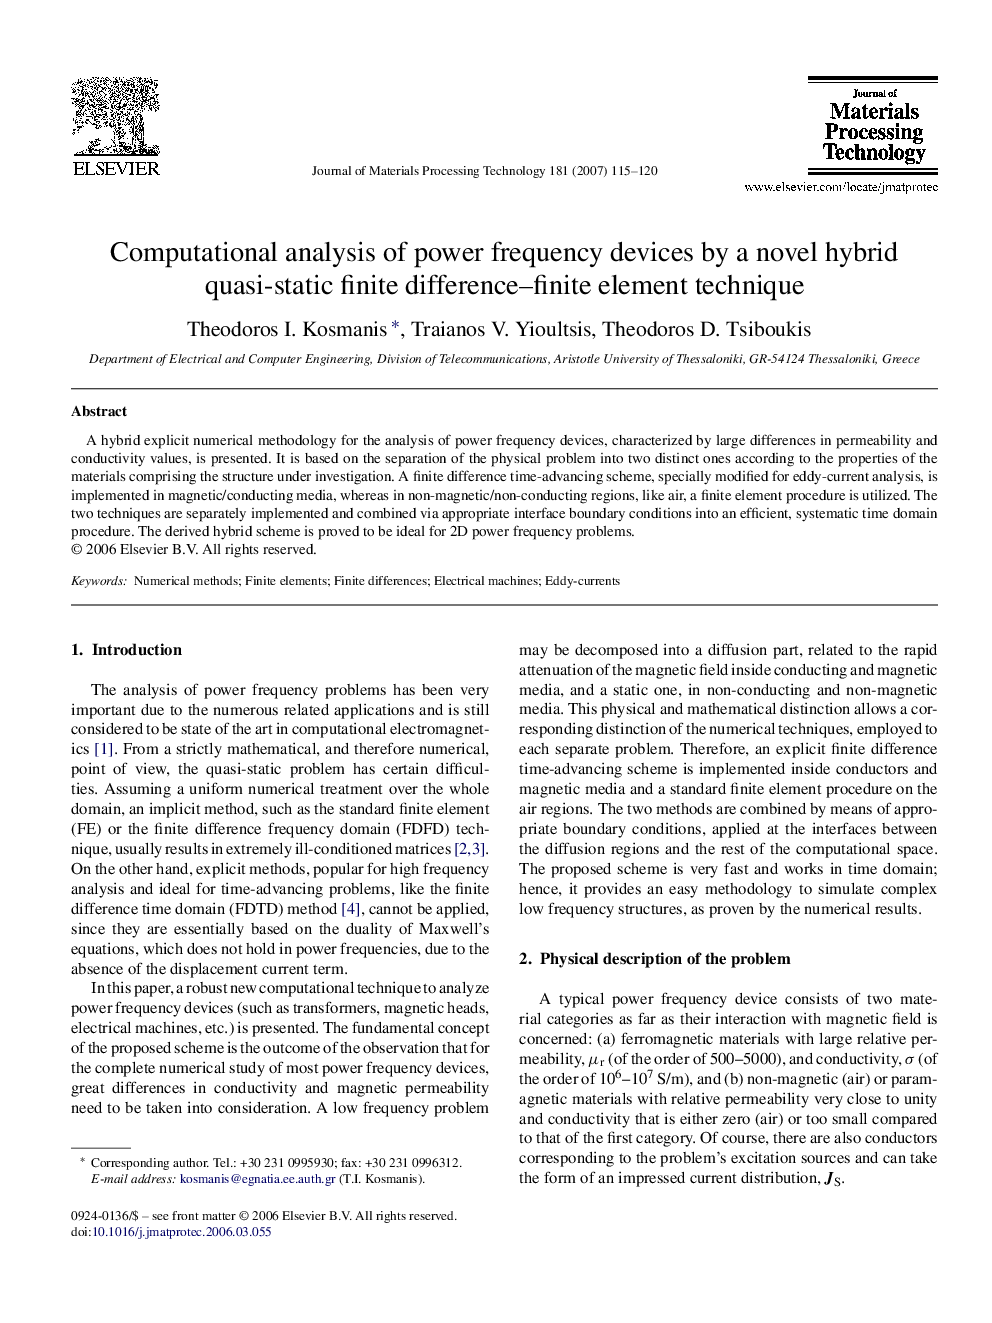 Computational analysis of power frequency devices by a novel hybrid quasi-static finite difference–finite element technique